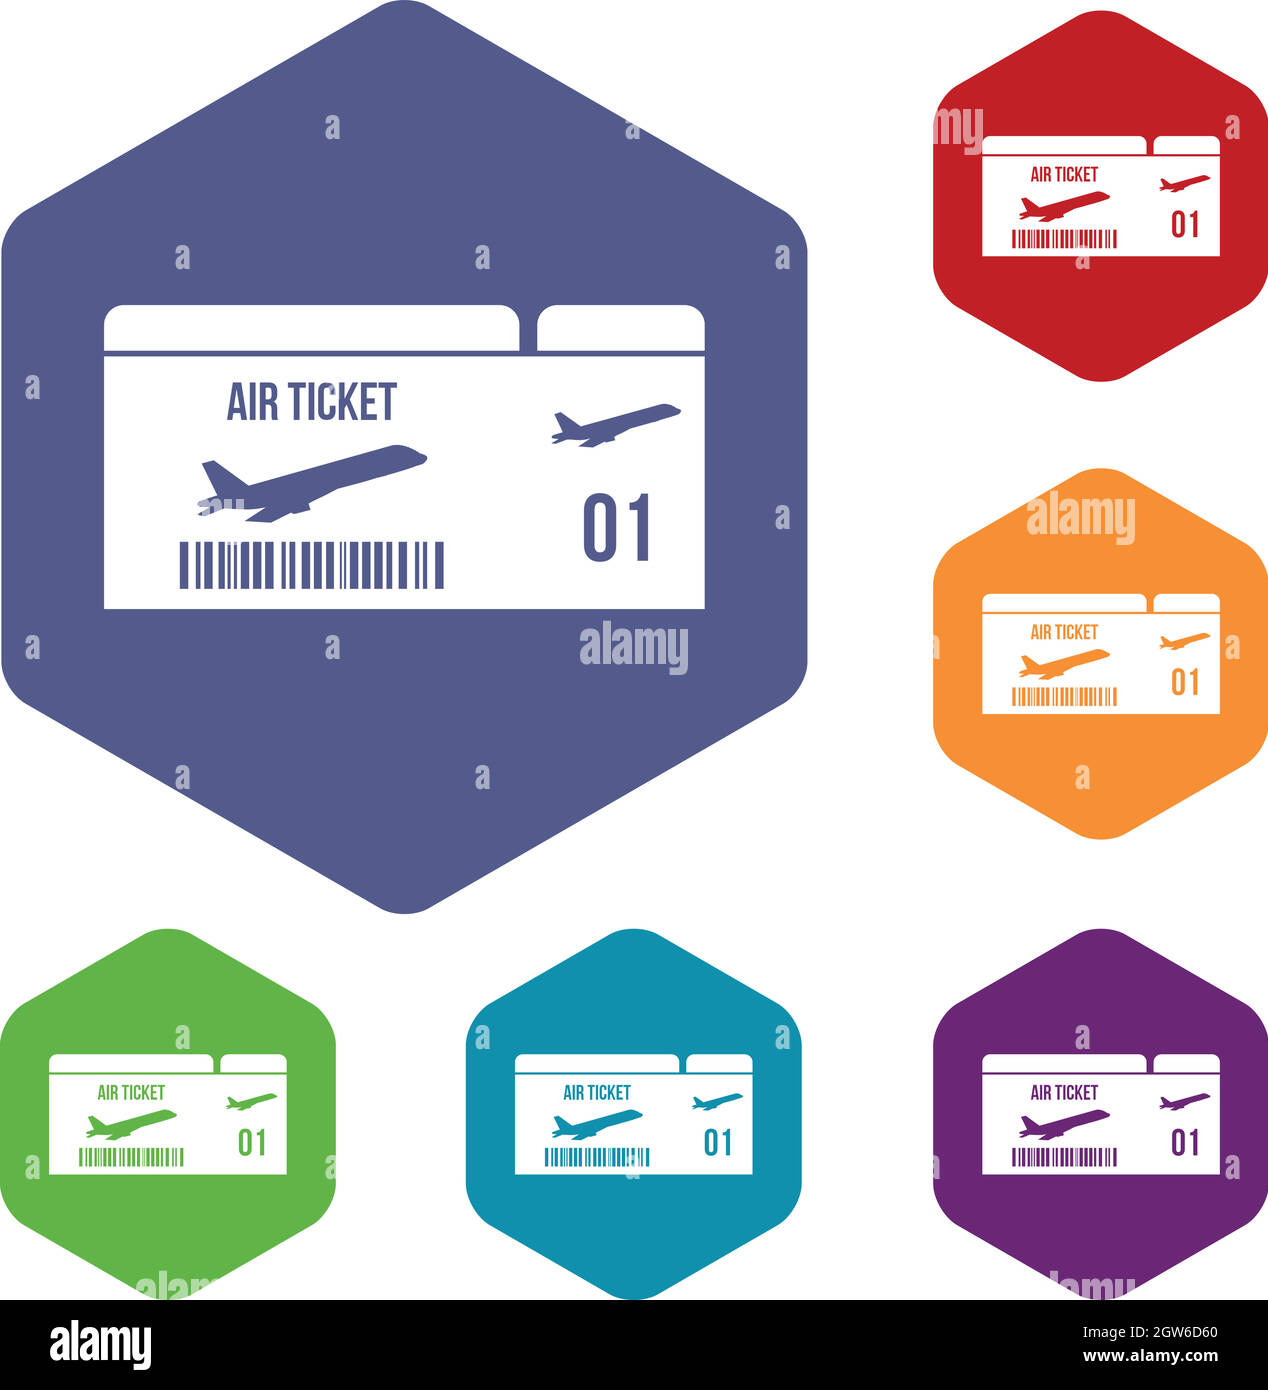 Airline boarding pass icons set Stock Vector